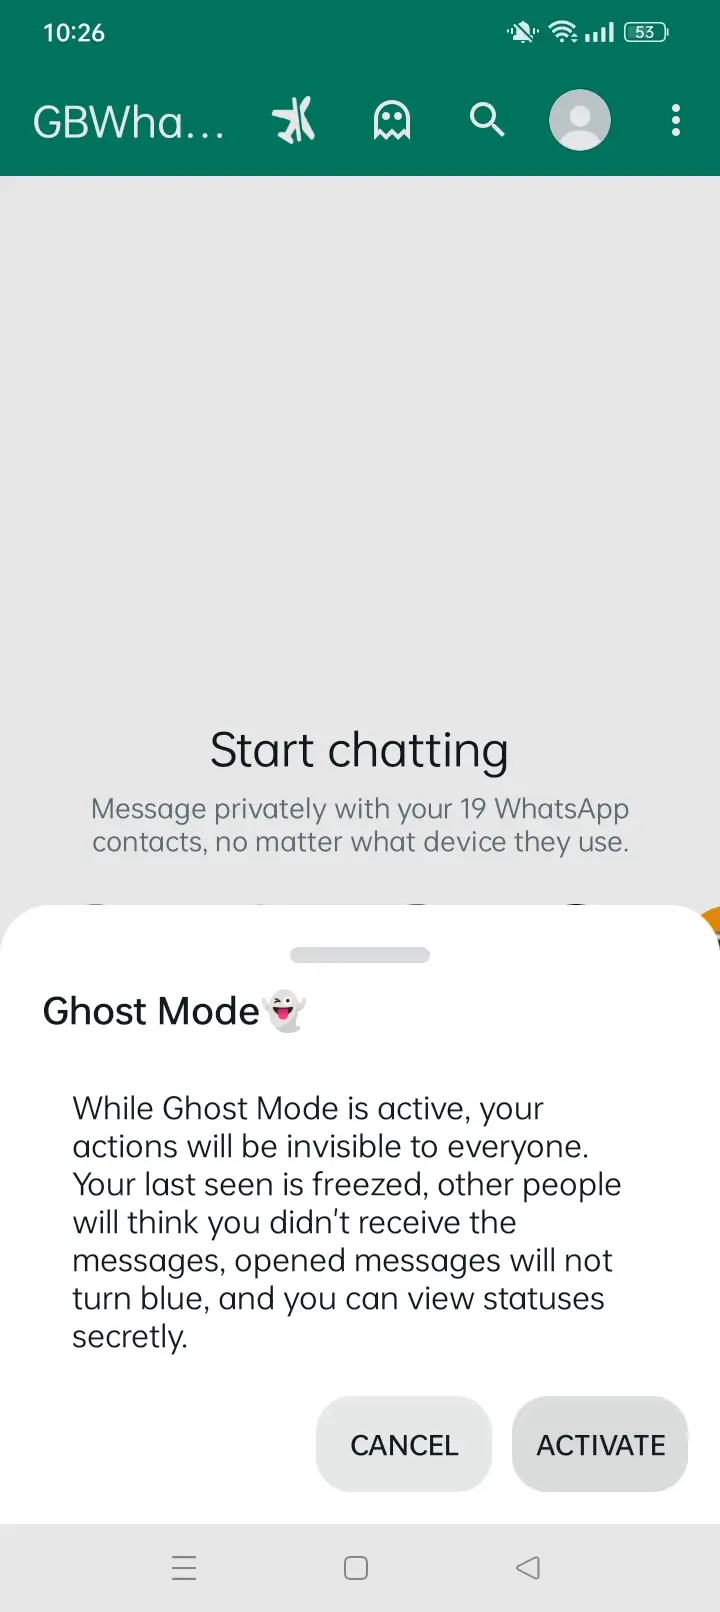 gost-mode-feature-of-gb-whatsapp-pro